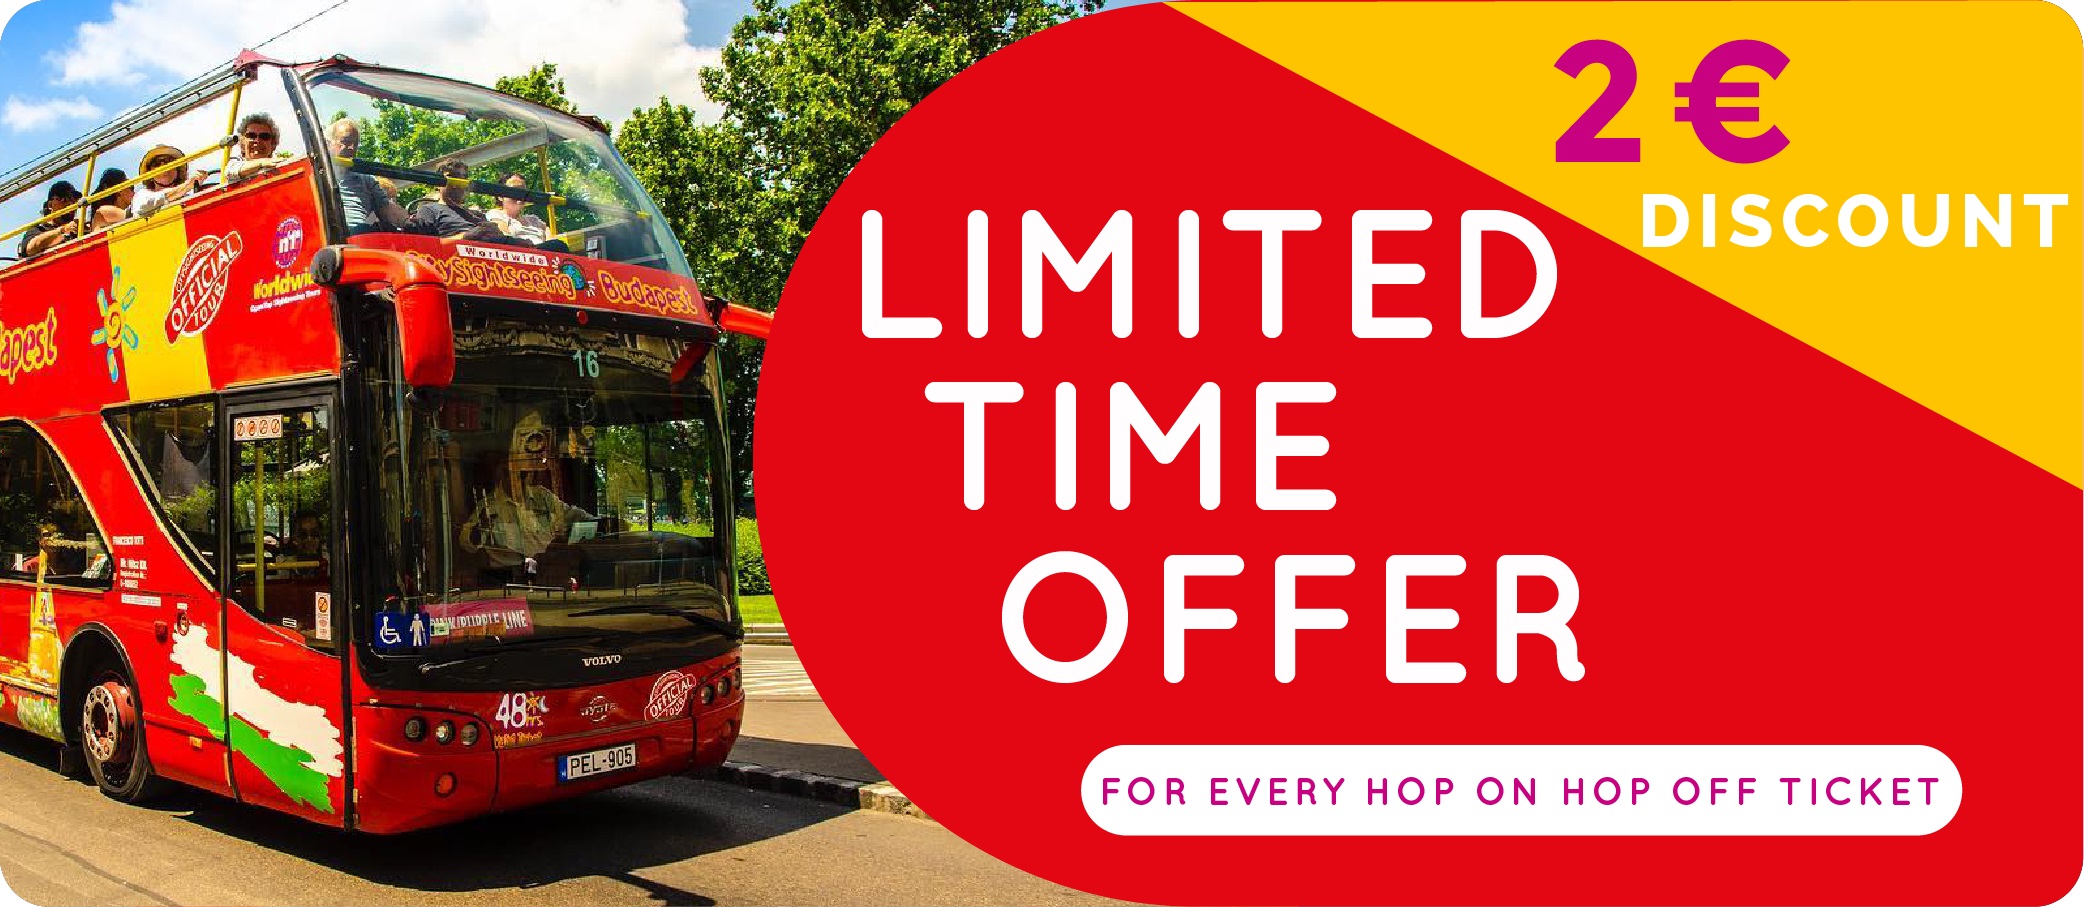 Hop On Hop Off Discount only online price